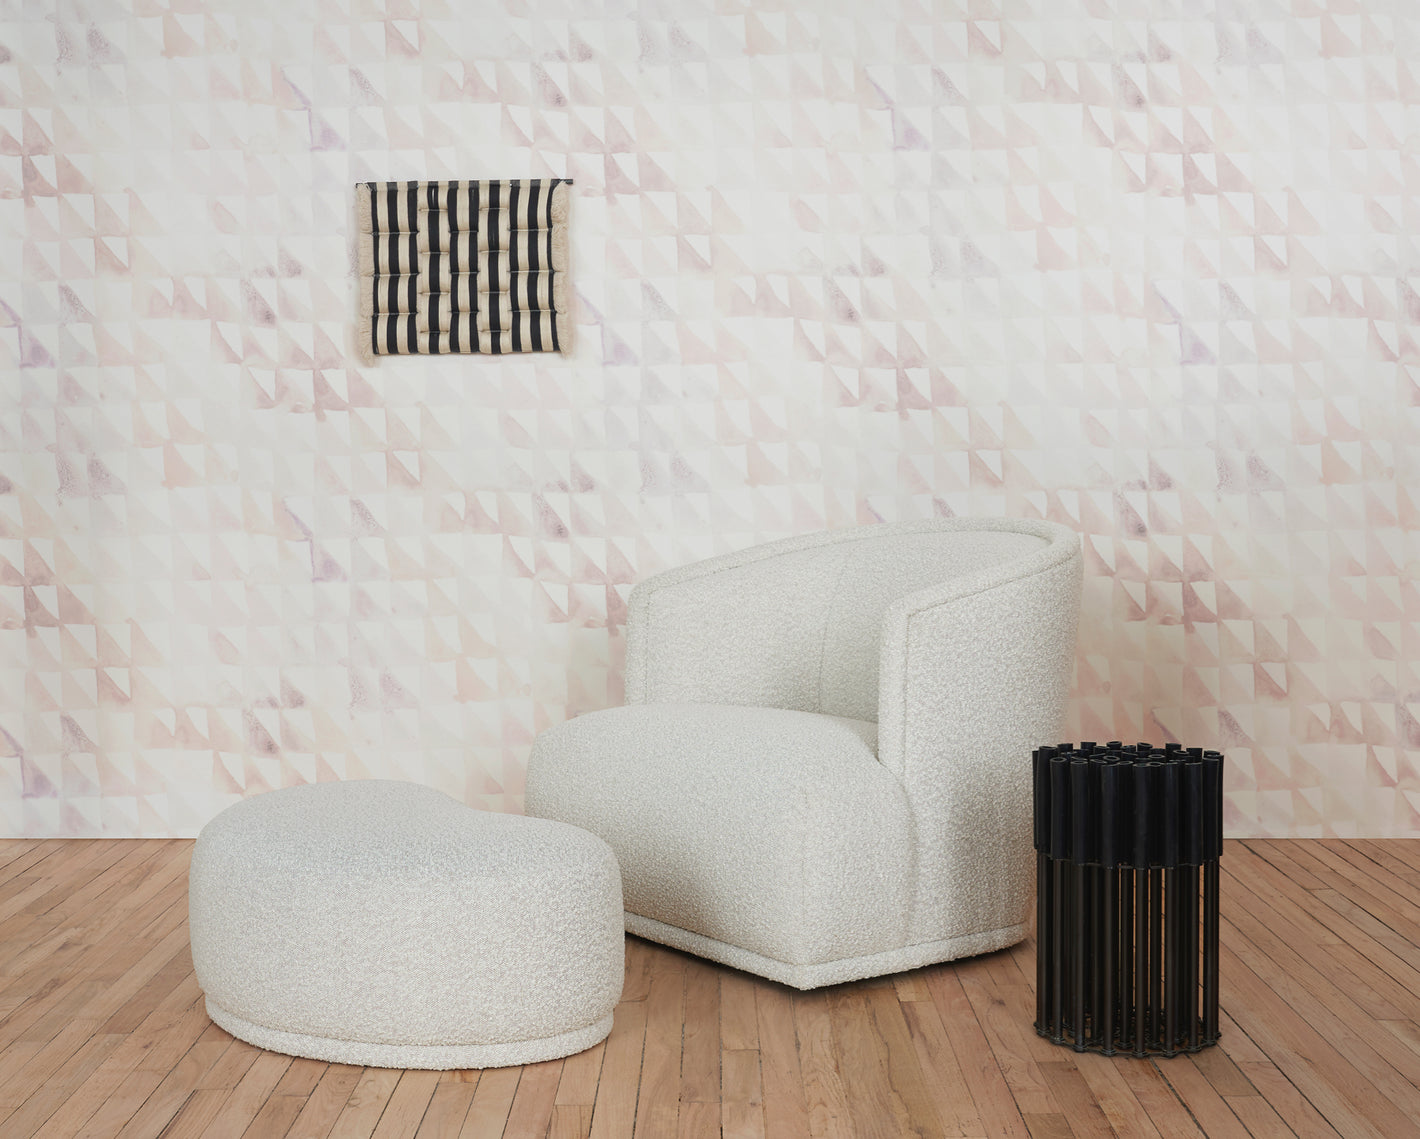 A white chair in front of a wall with a geometric pattern